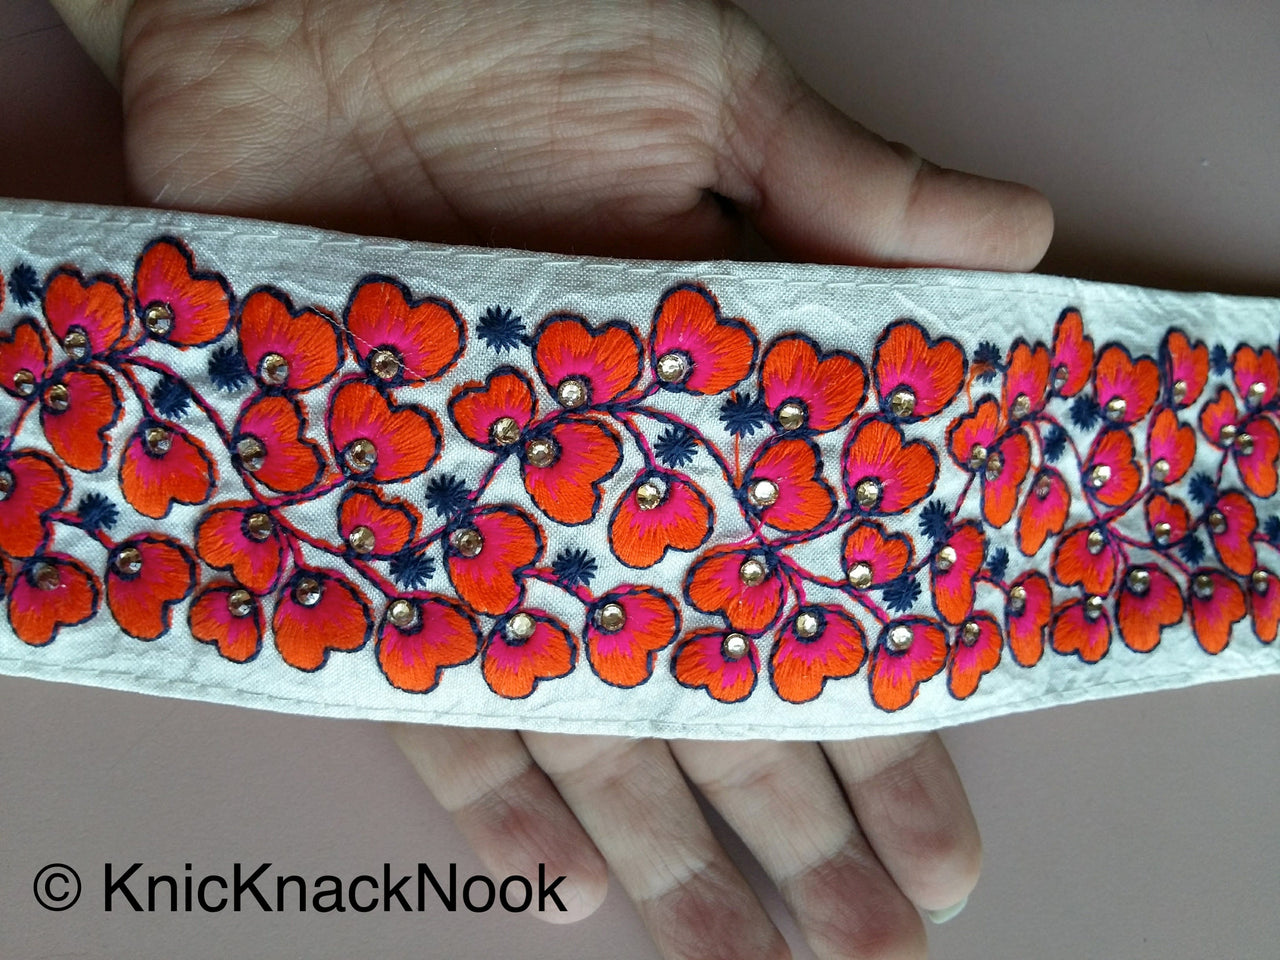 Beige Fabric Trim With Green / Orange / Fuchsia Pink Floral Embroidery, 58mm wide - 200317L454 / 55 / 56